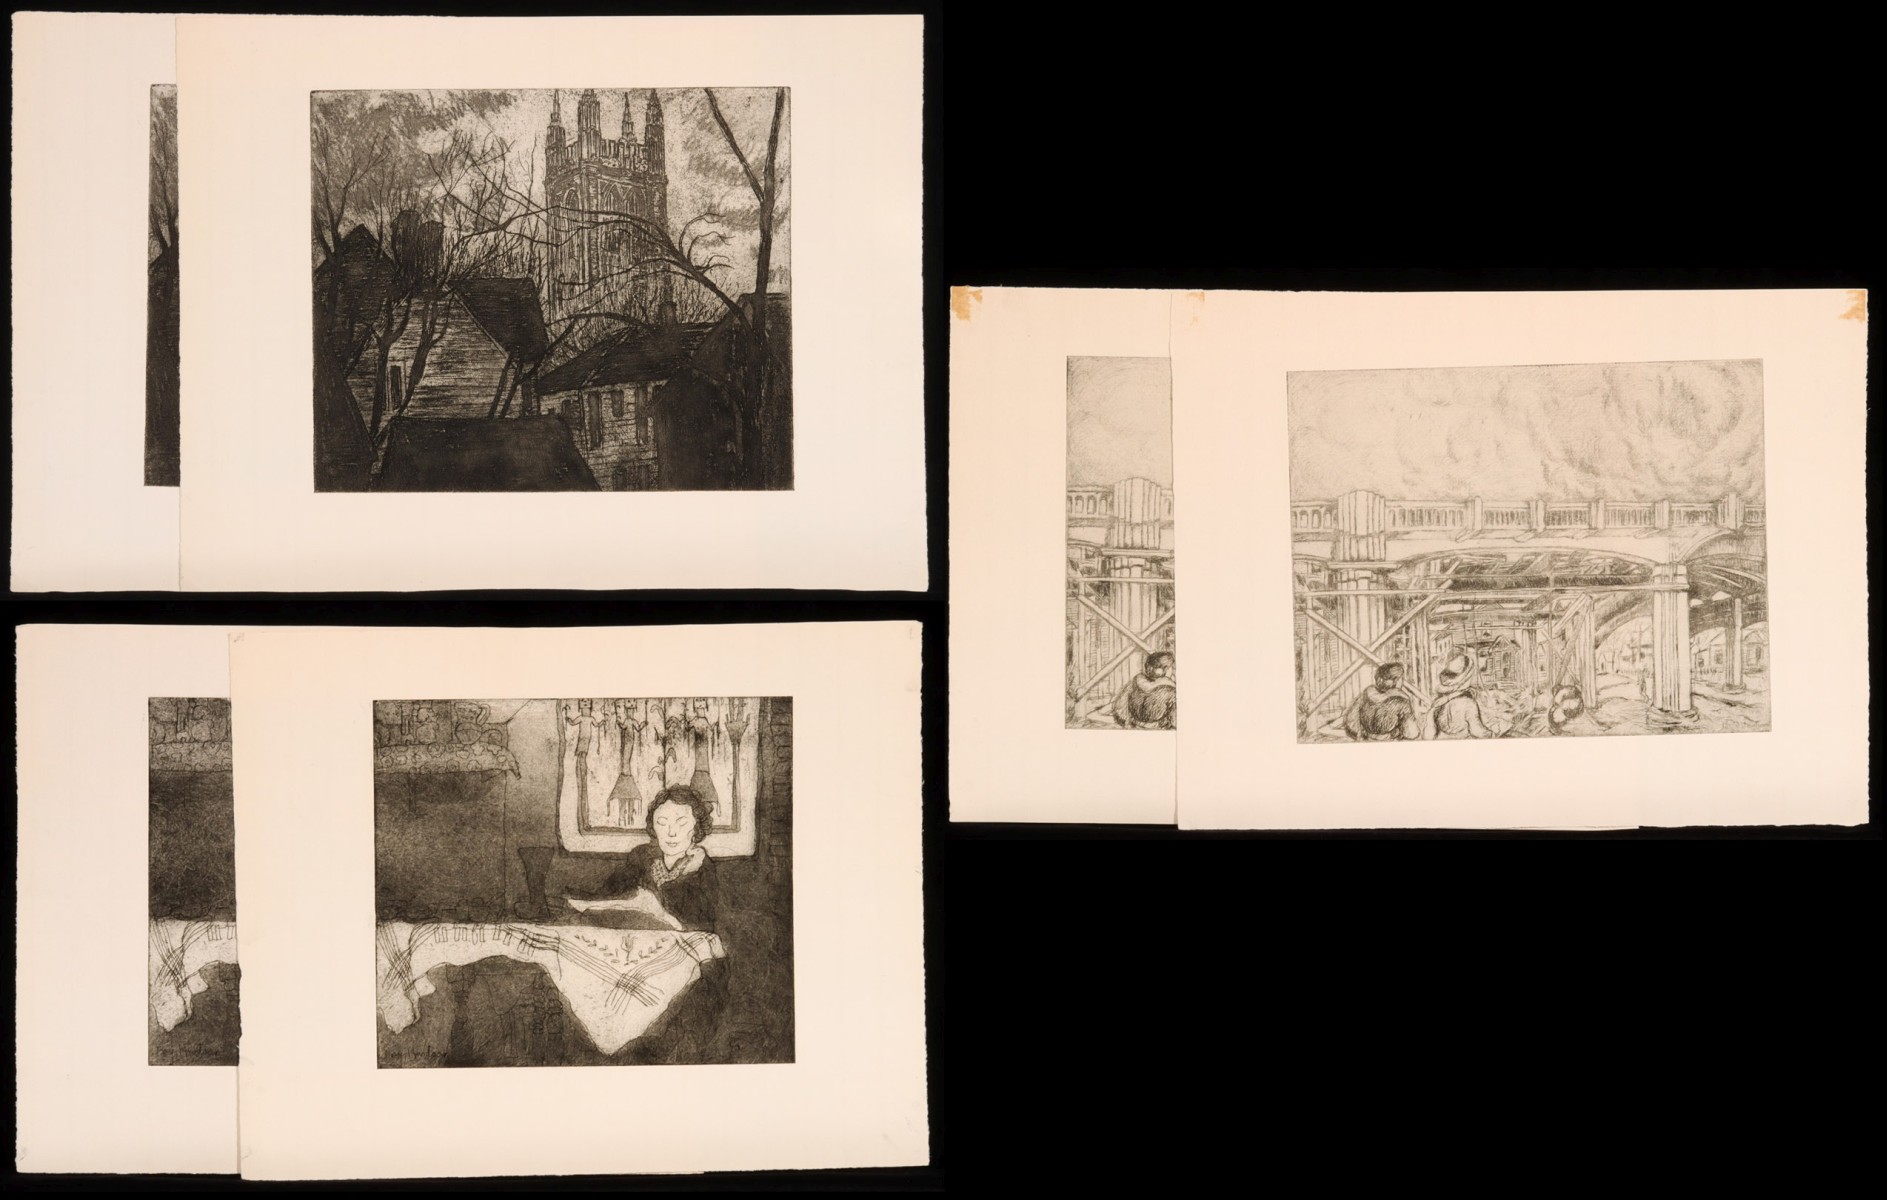 UNSIGNED MARY HUNTOON FEDERAL ART PROJECT ETCHINGS